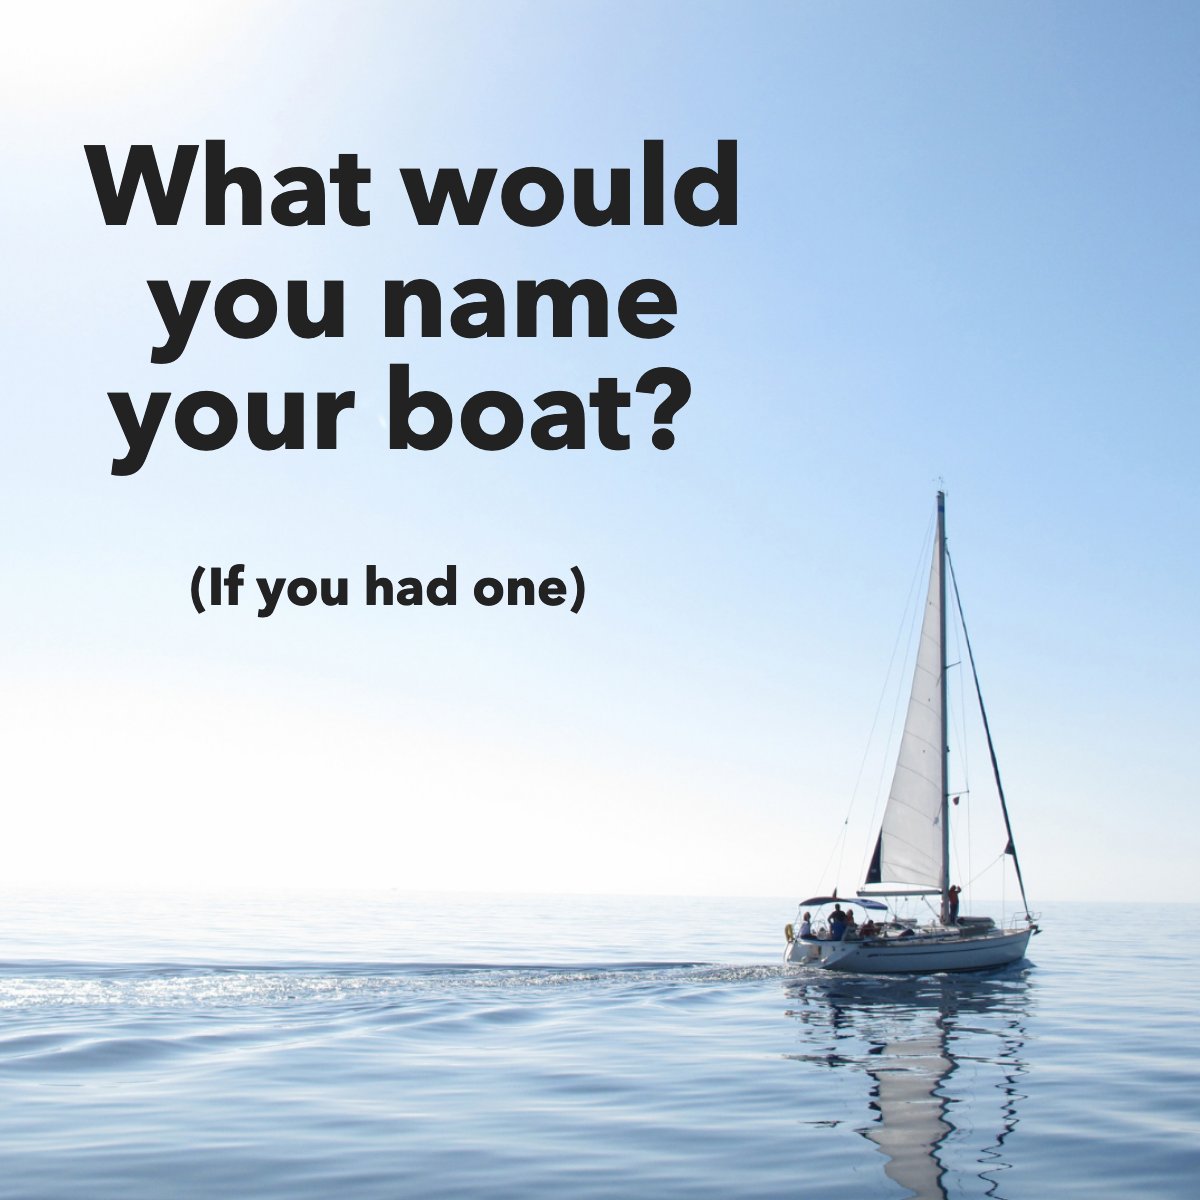 Naming boats after famous songs, movies, or other cultural arts you love is acceptable and entertaining. 😆😉

#boatrip #boatinglife #boats #ocean #searayboats #boatfishing
 #ghentteam #expertadvice #realestateadvisors #buyers #sellers #investors